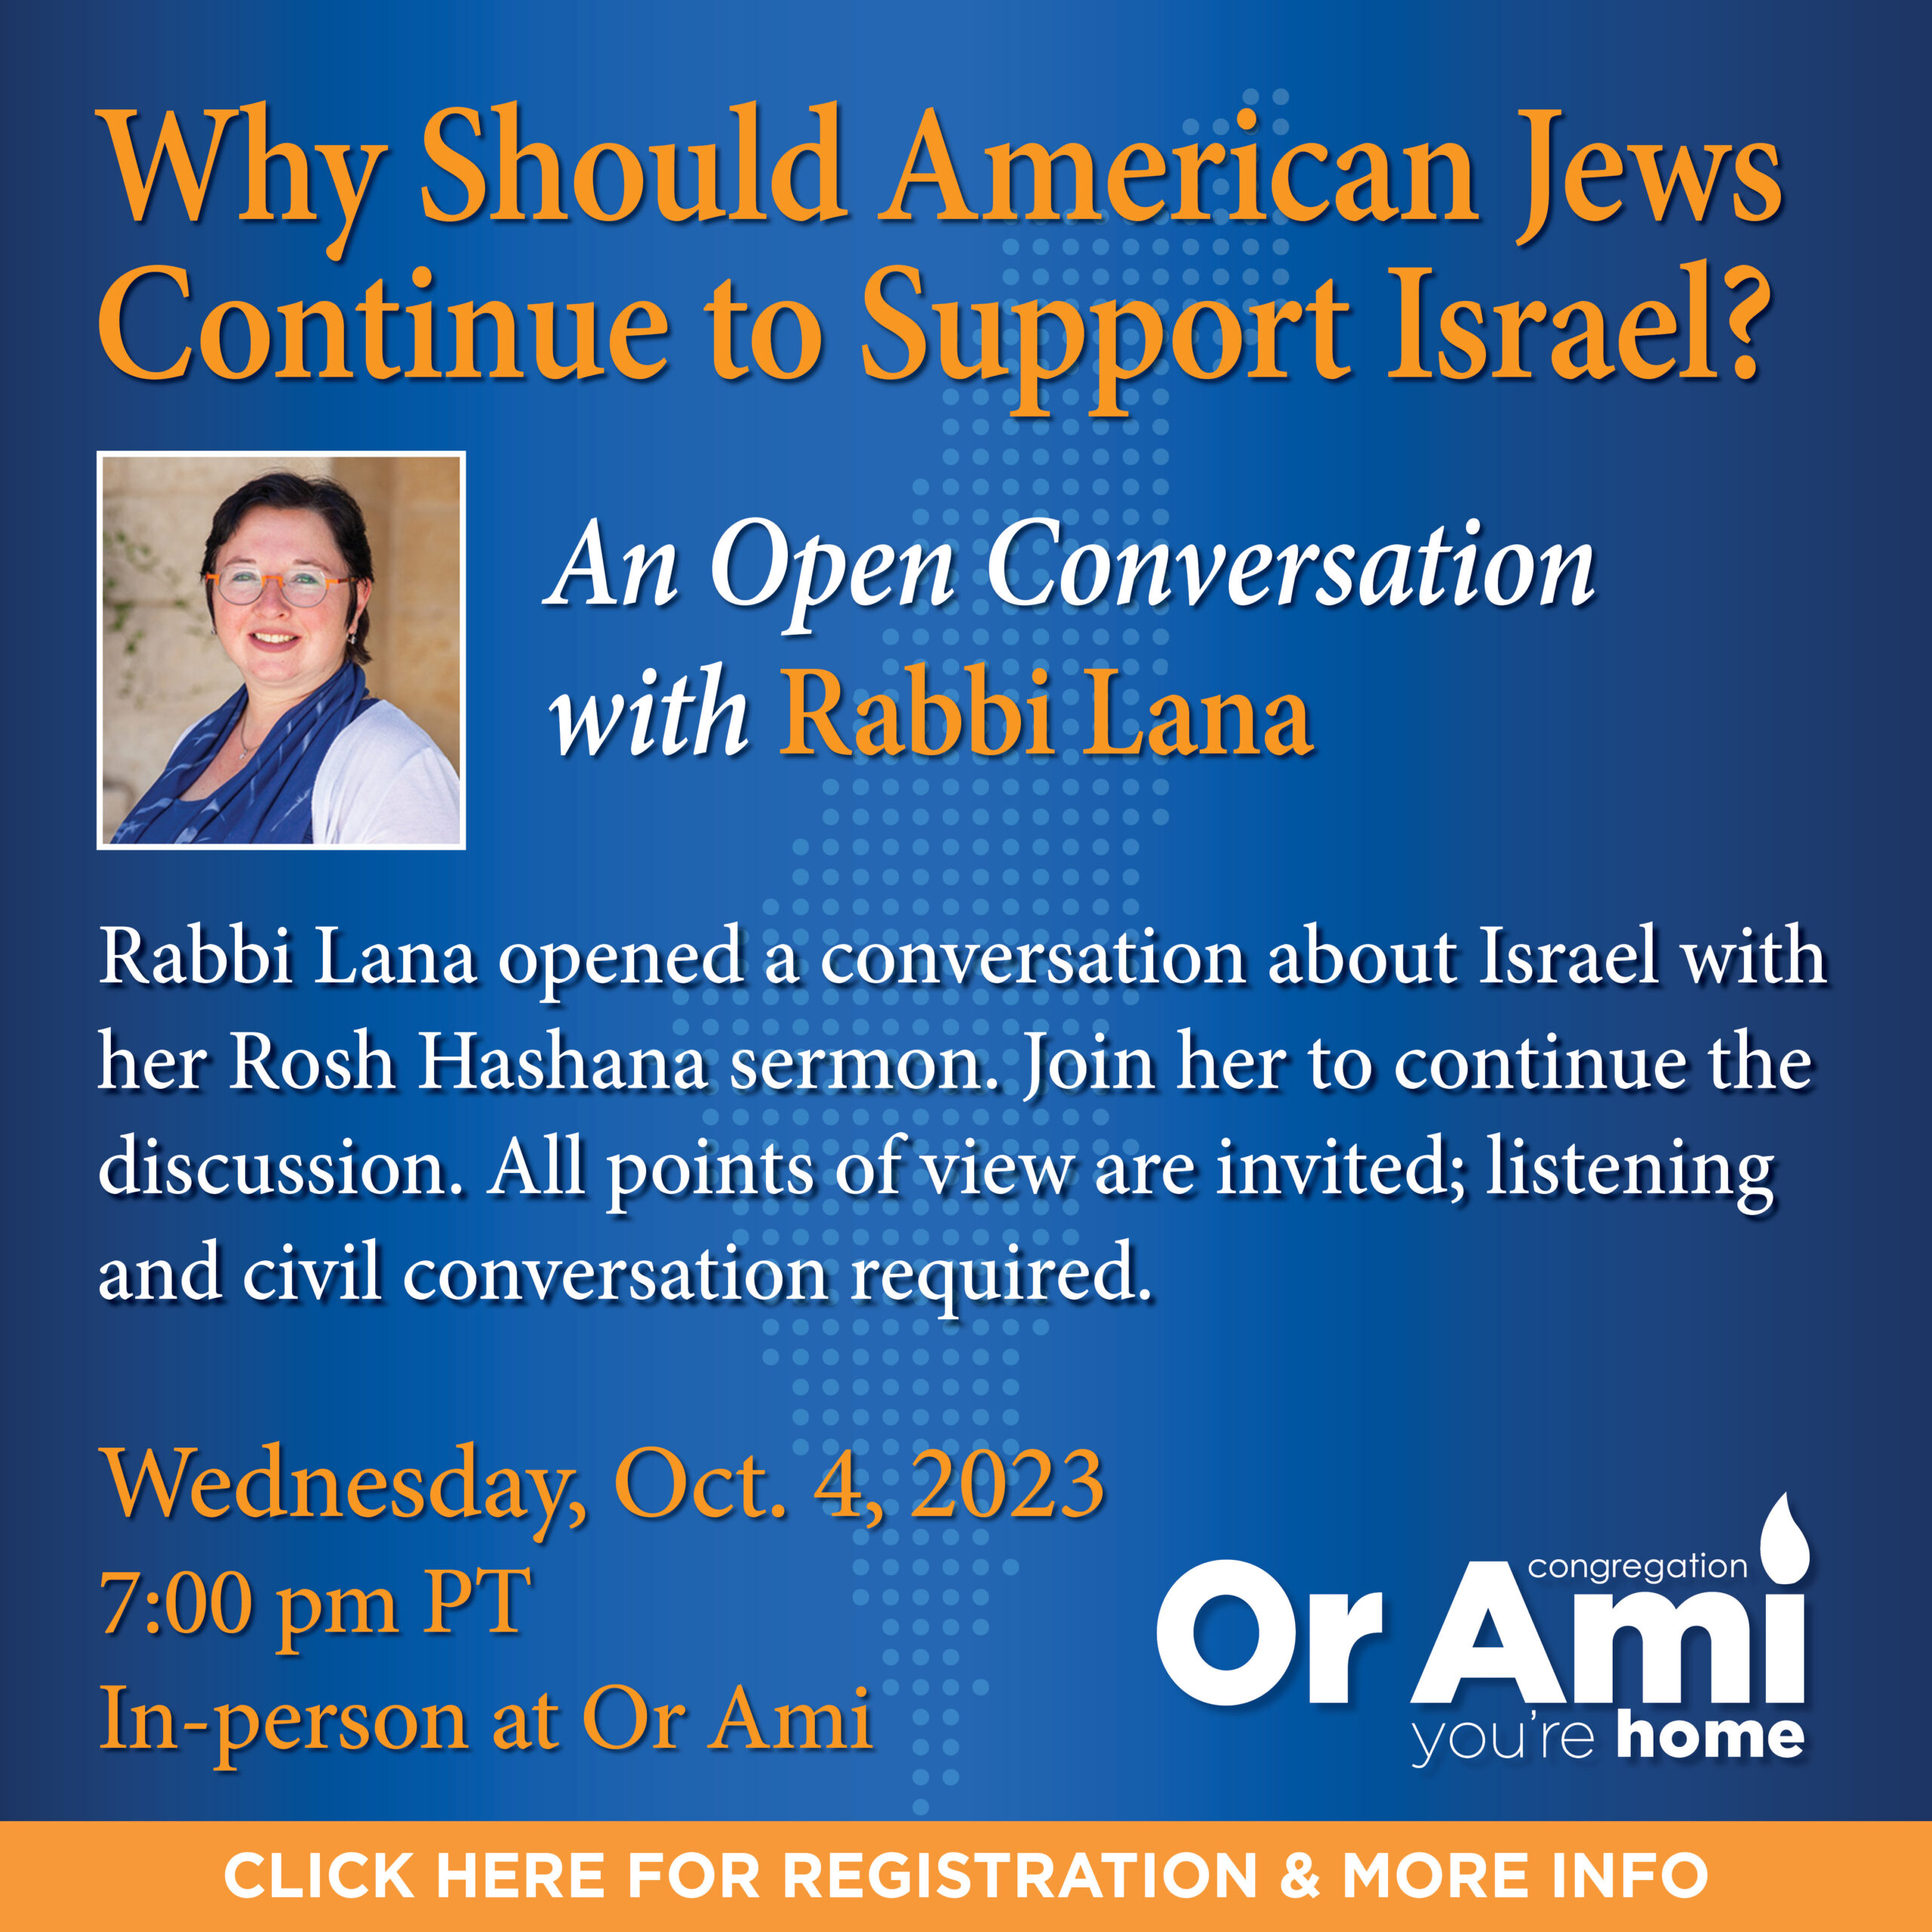 *Or Ami Why Should American Jews Continue to Support Israel CLICK